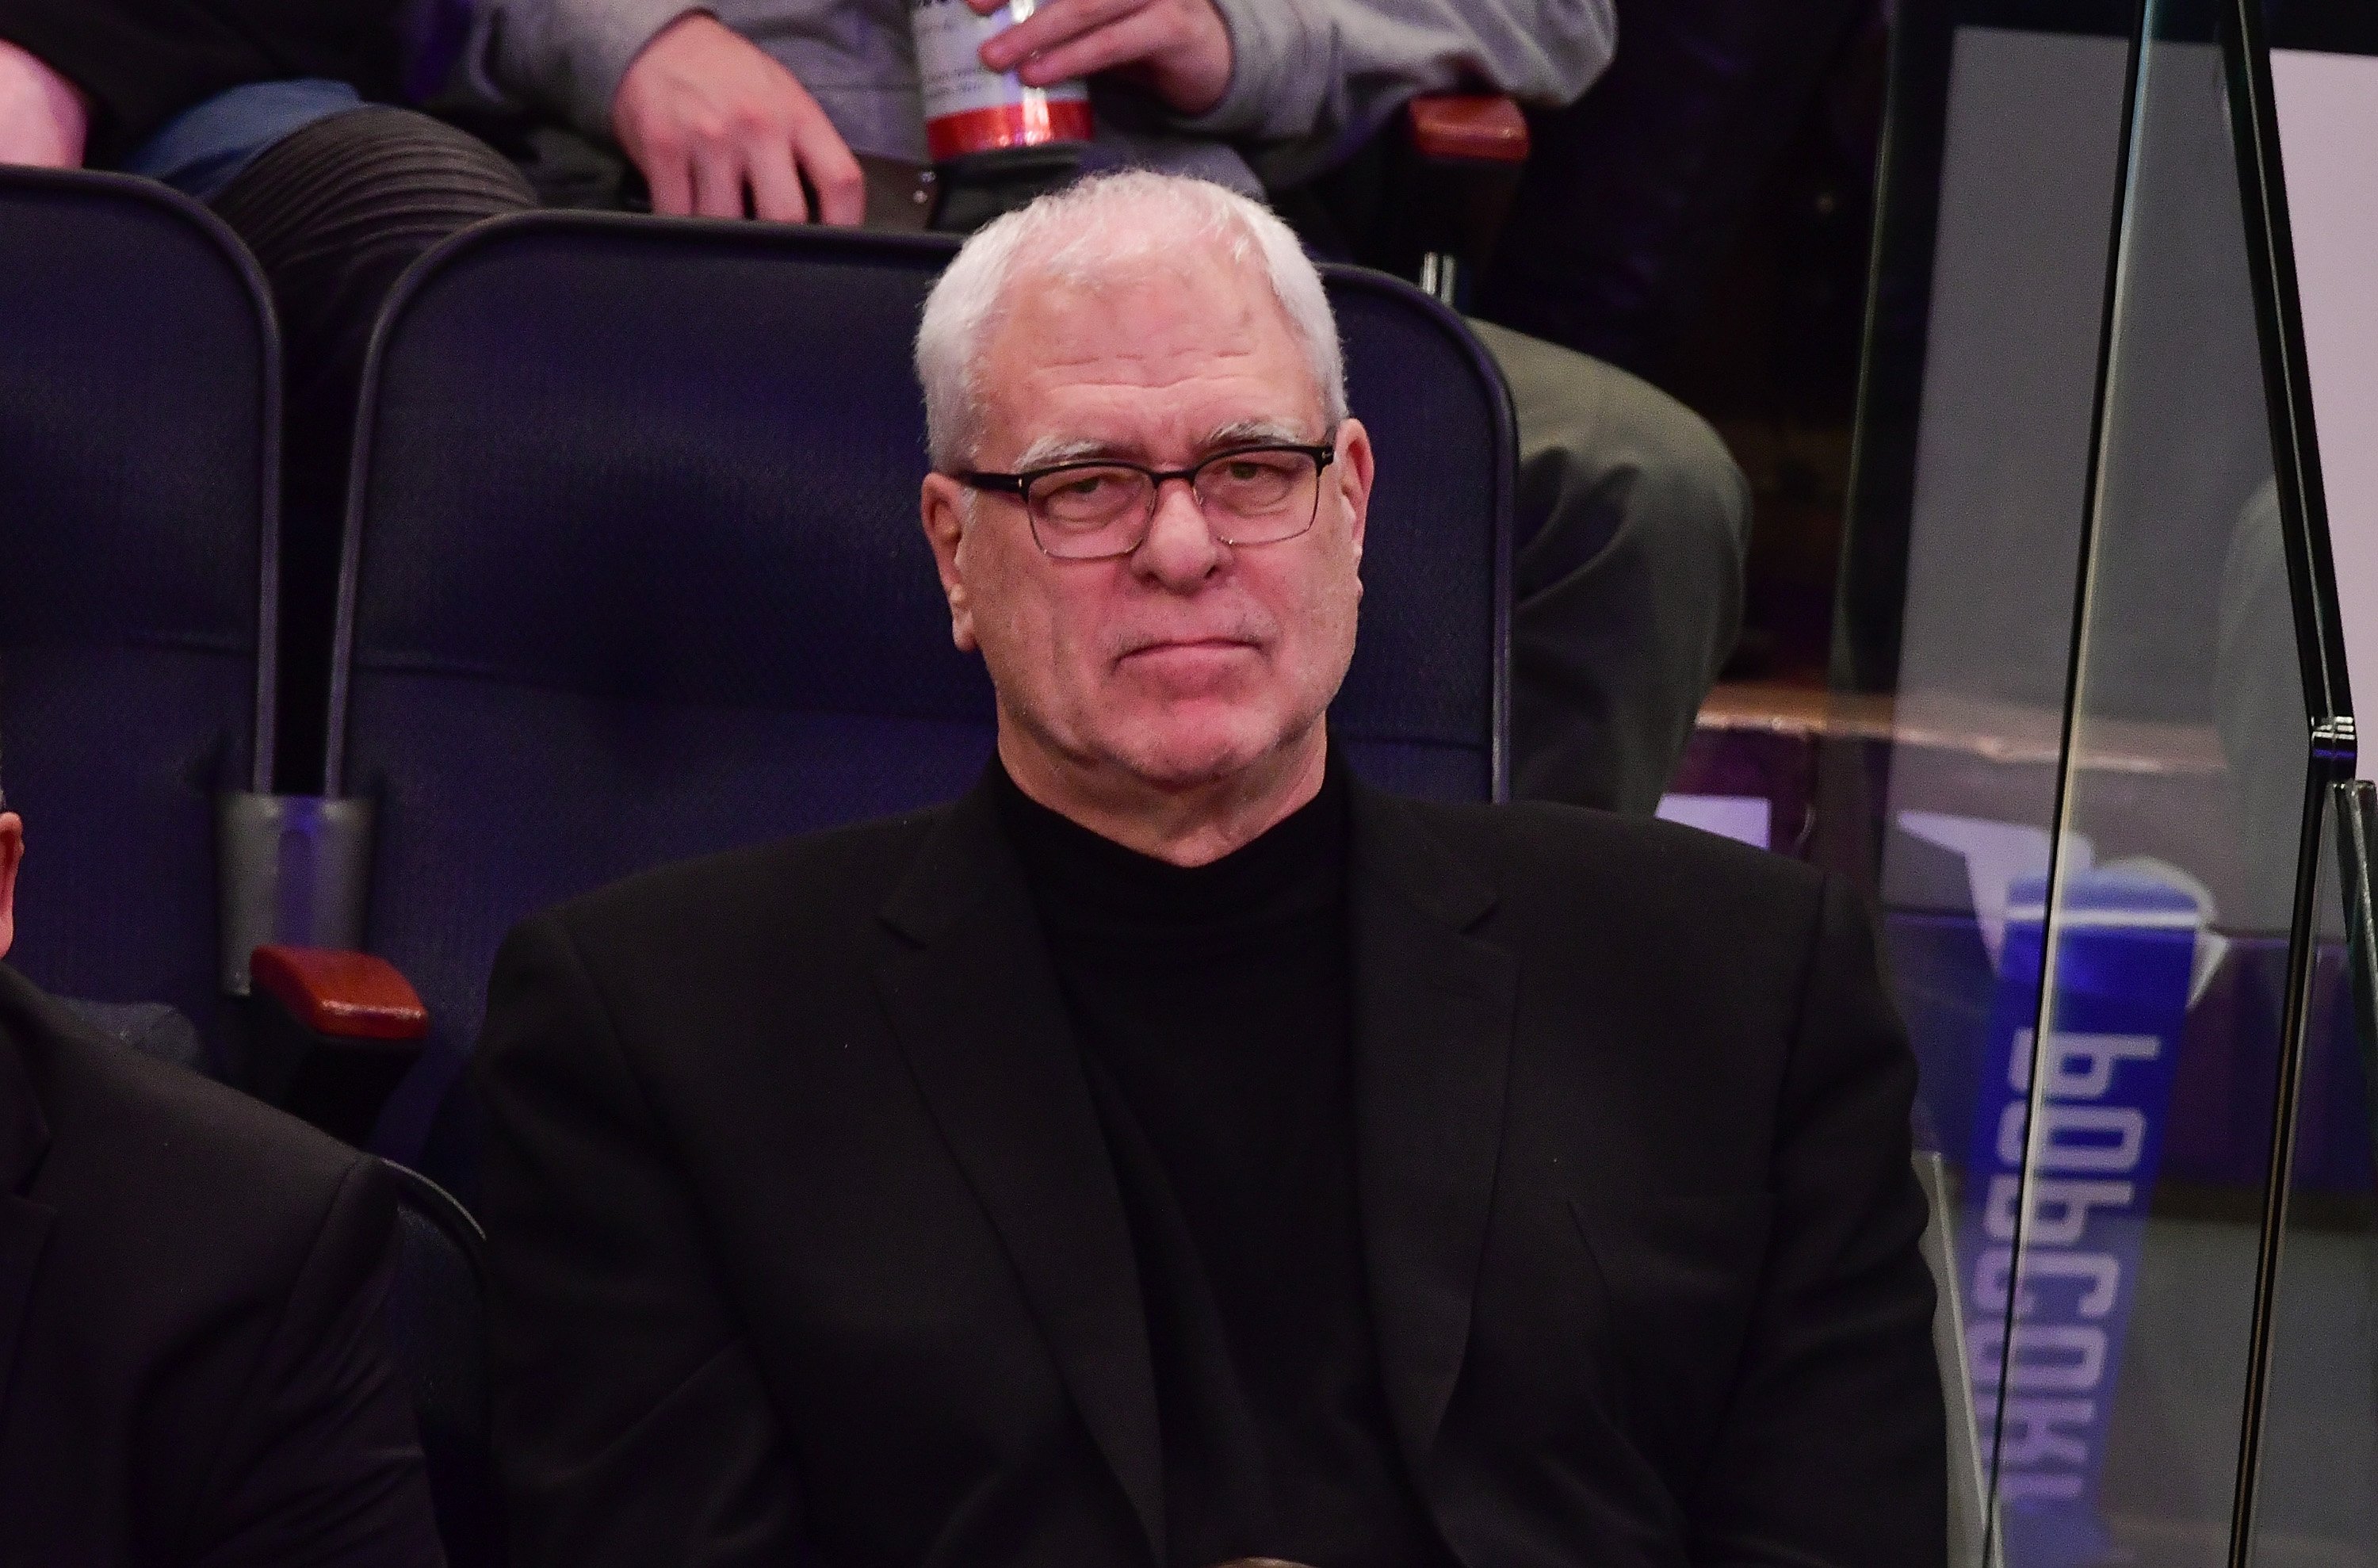 Phil Jackson attends Sacramento Kings vs New York Knicks game at Madison Square Garden on December 4, 2016 | Photo: Getty Images